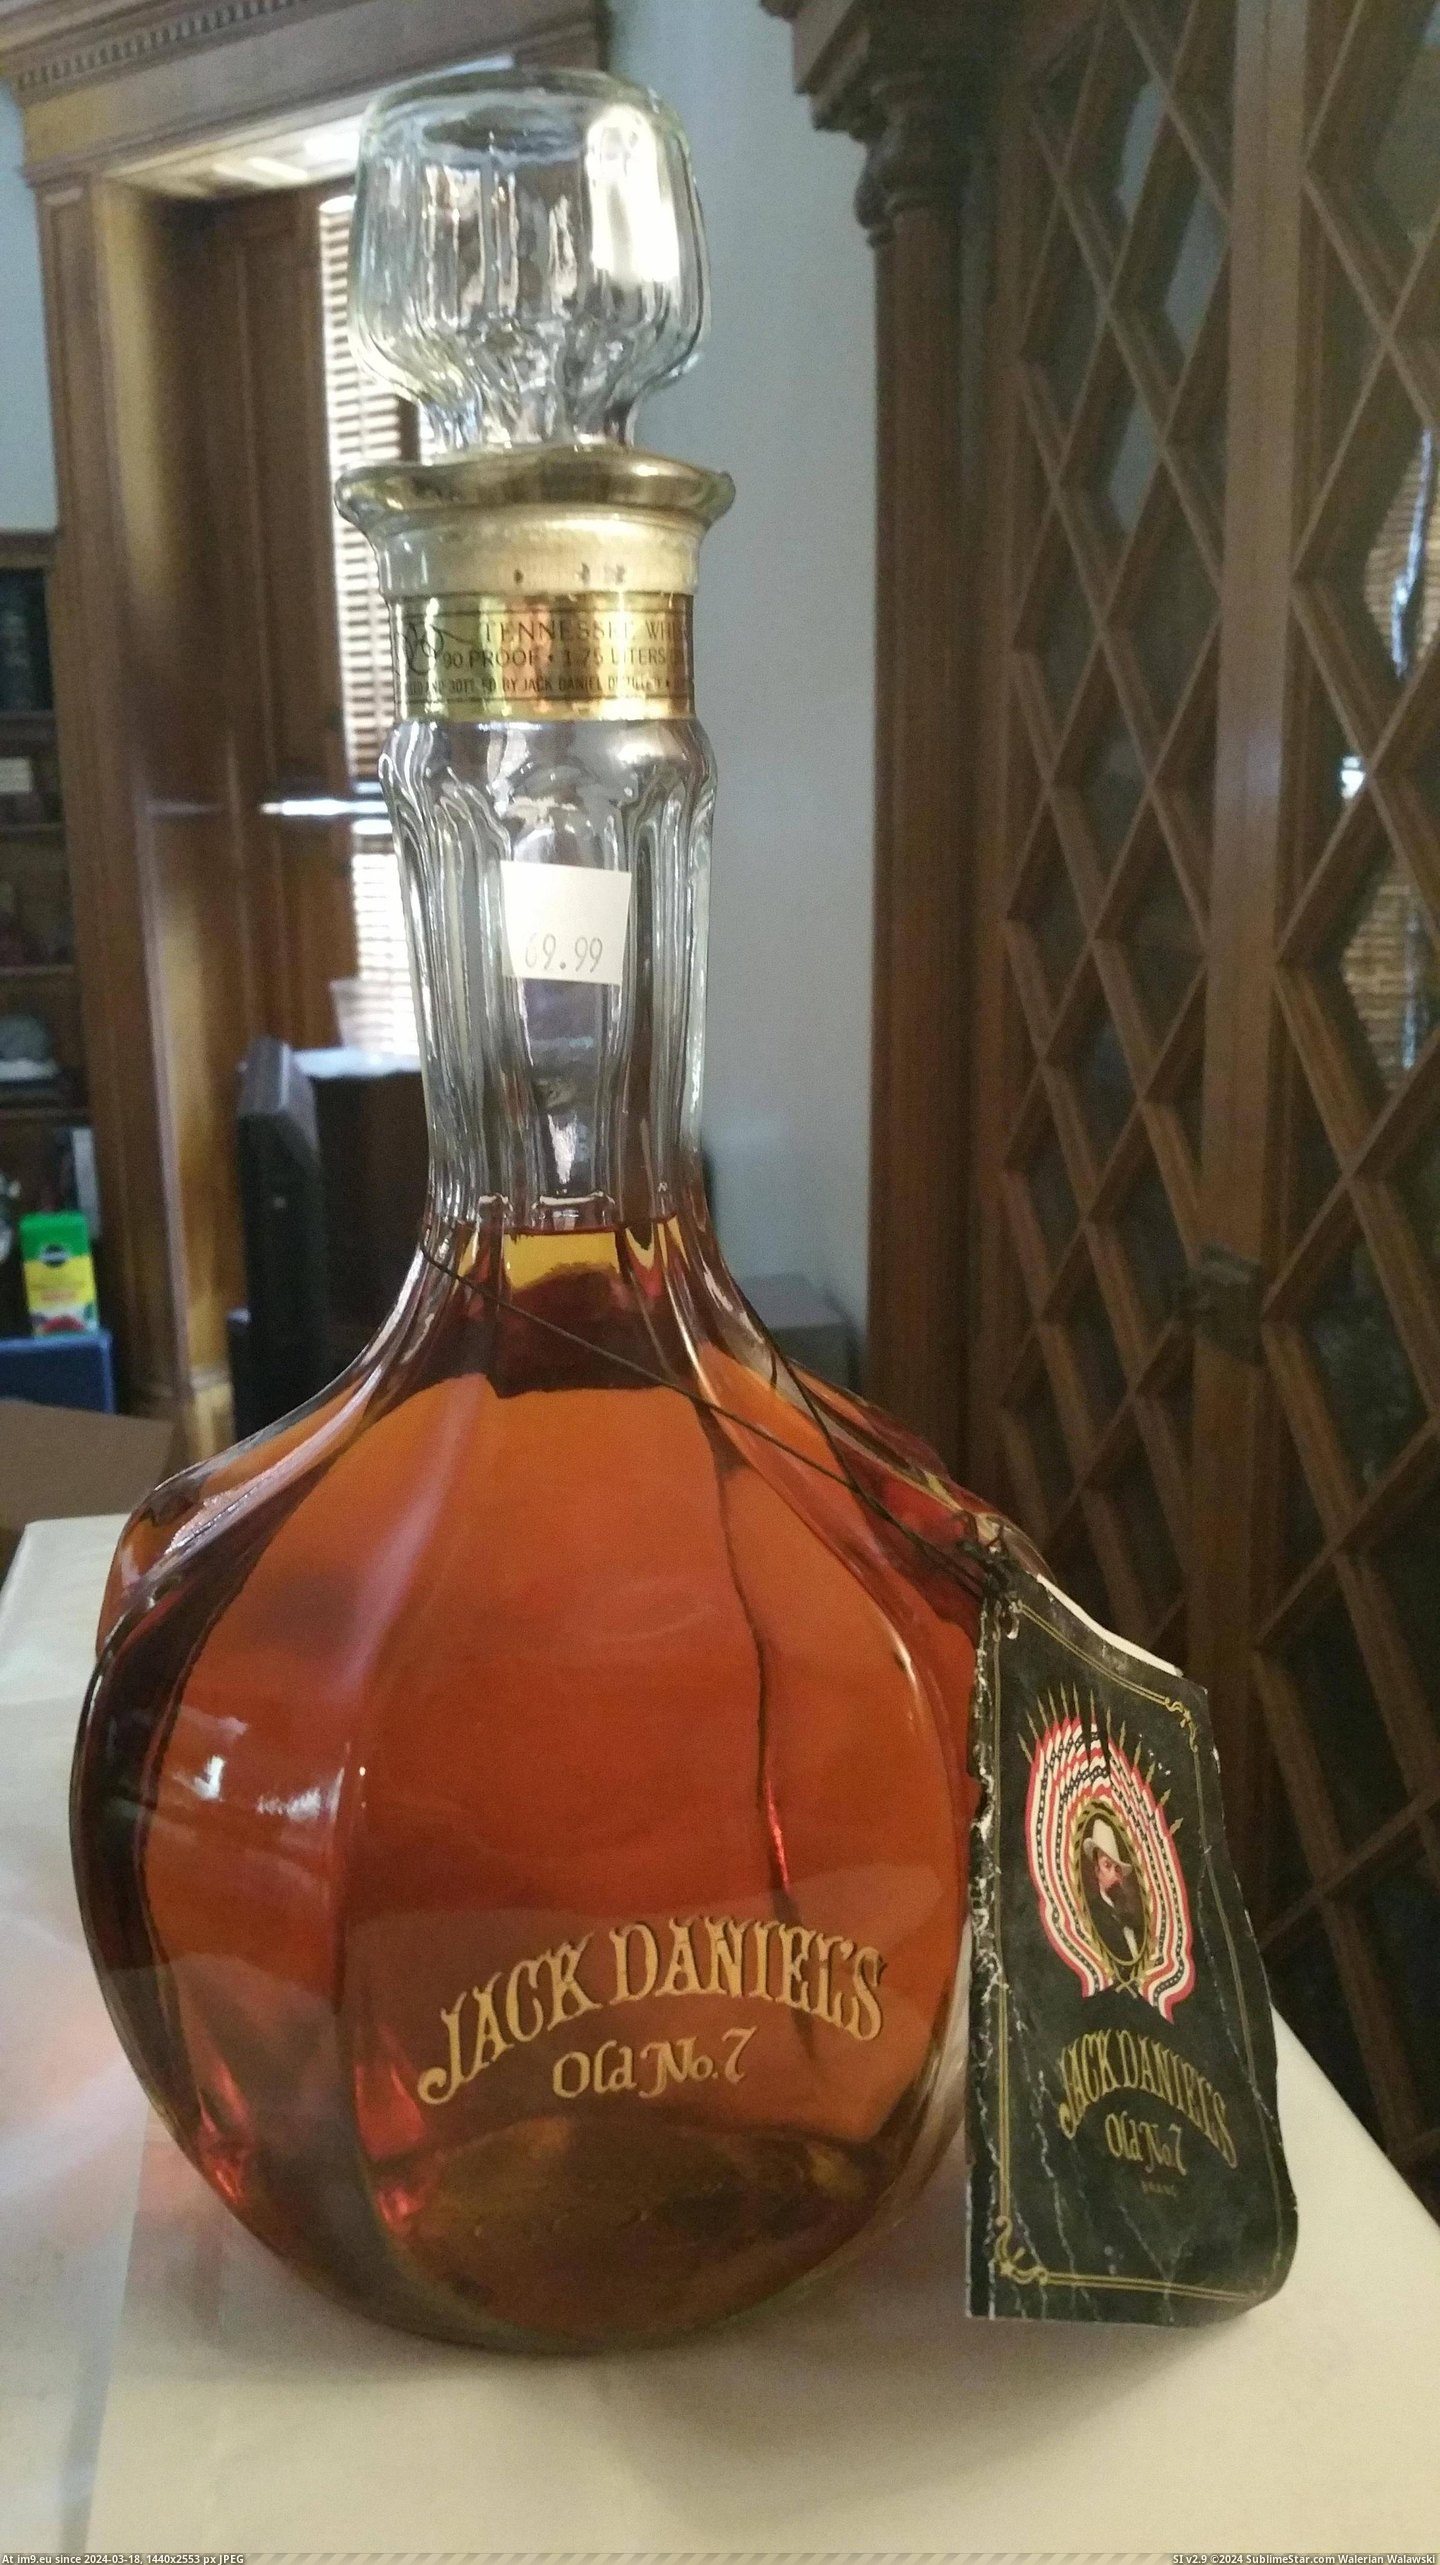 #Wife #Store #Office #Owner #Liquor #Passed #Stuck #Price [Pics] So the liquor store owner passed, his wife found this stashed back in the office, put a price on it($69.99), and stuck it Pic. (Изображение из альбом My r/PICS favs))